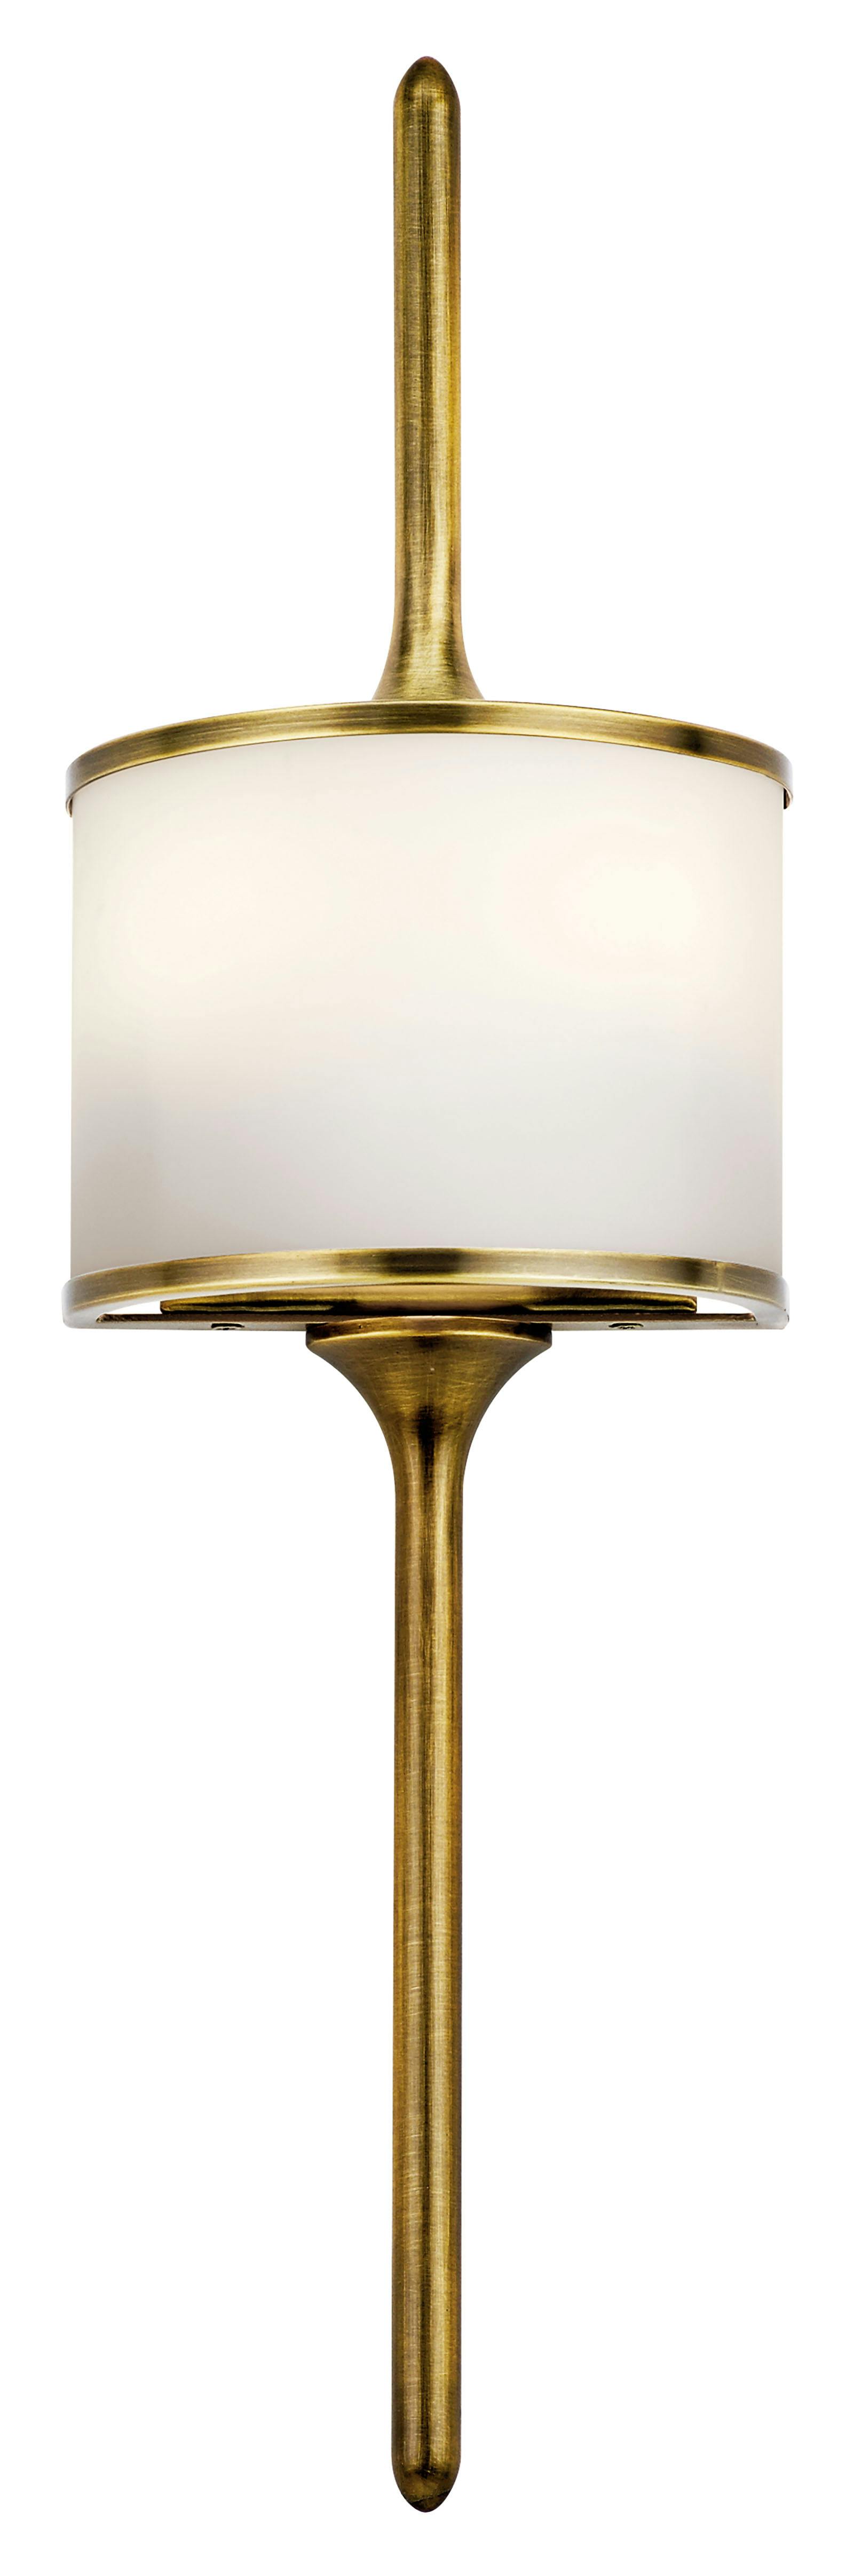 Front view of the Mona 2 Light Halogen Sconce Natural Brass on a white background